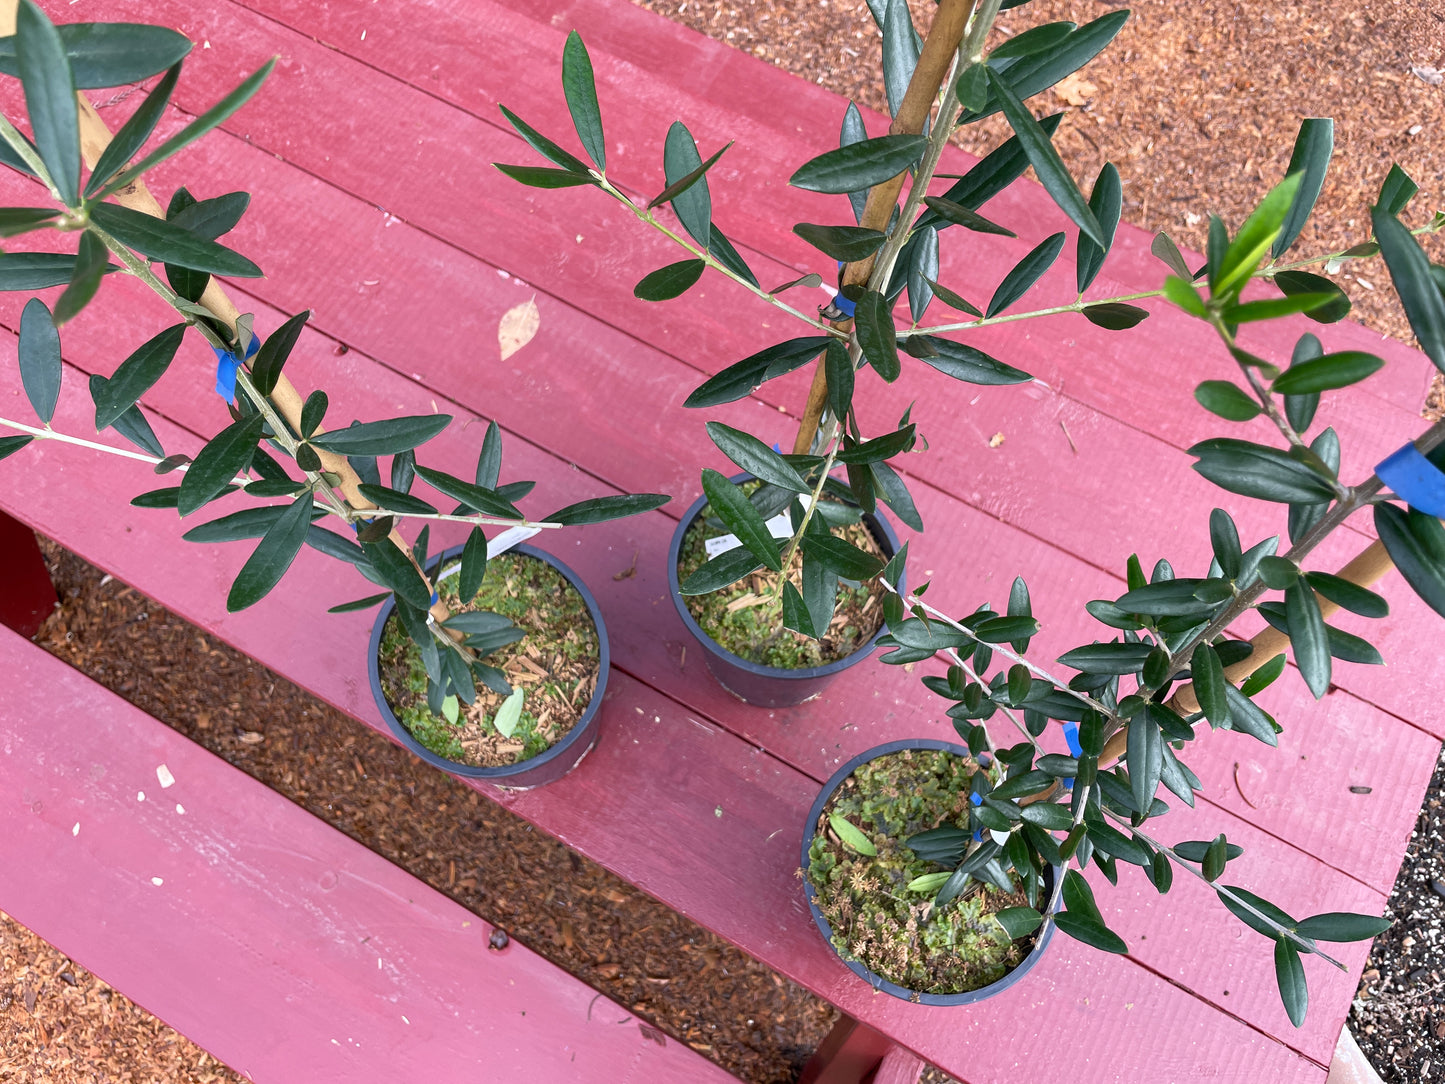 'Leccino' Olive Trees